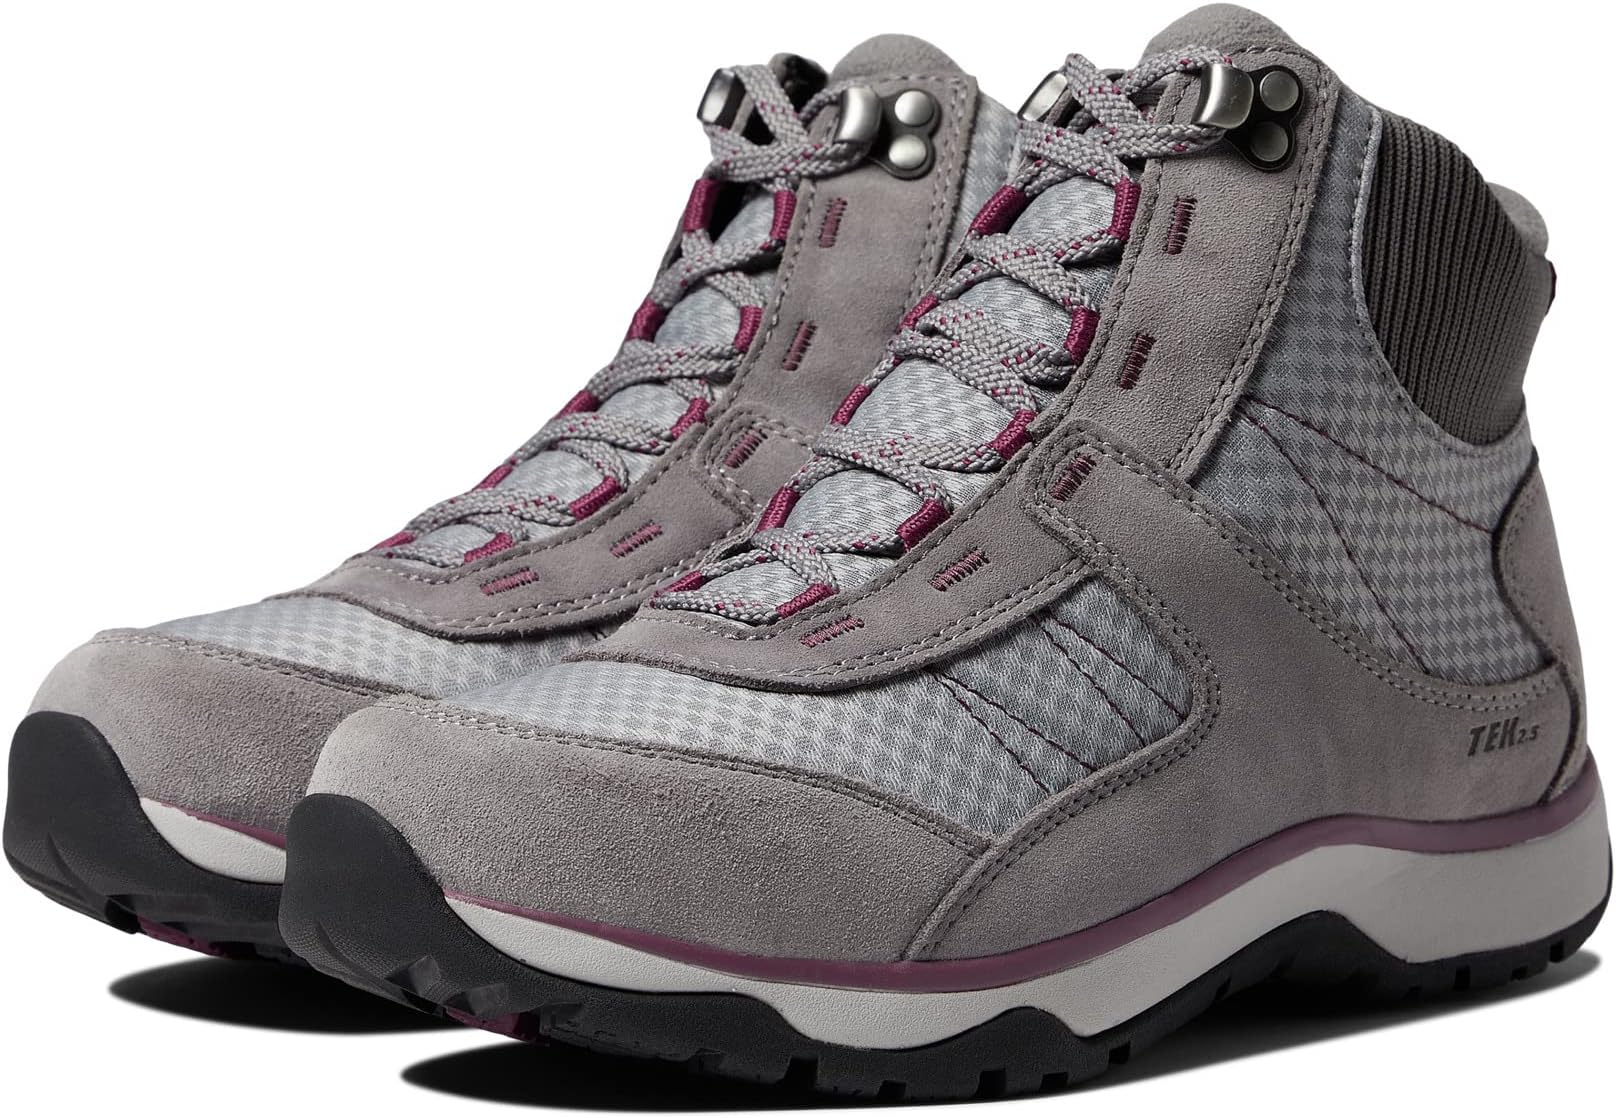 Зимние ботинки Snow Sneaker 5 Mid Boot Water Resistant Insulated Lace-Up L.L.Bean, цвет Frost Gray/Bramble Berry